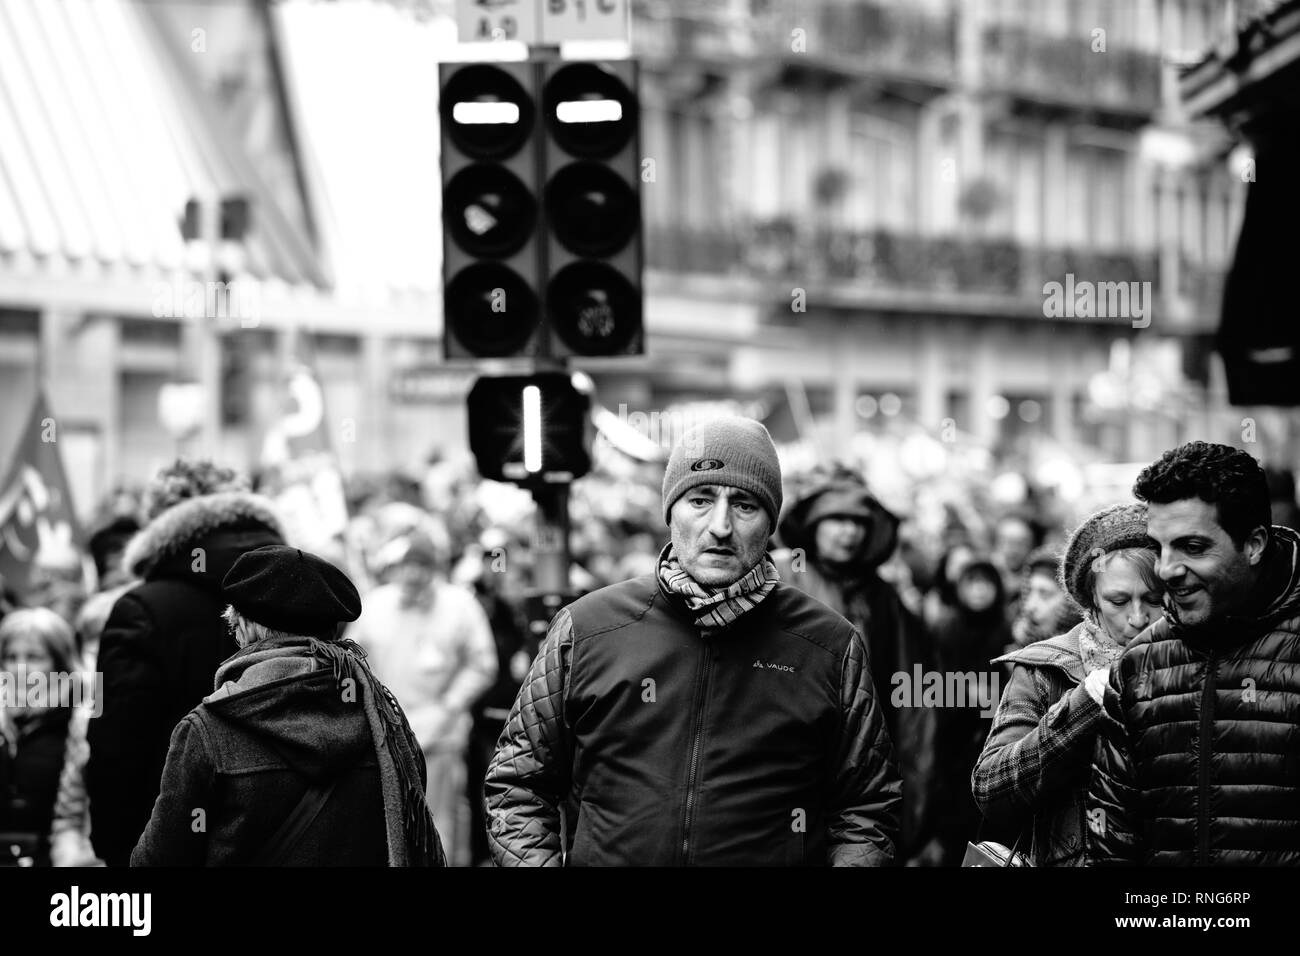 STRASBOURG, FRANCE - MAR 22, 2018: CGT General Confederation of Labour workers with placard at demonstration protest against Macron French government string of reforms - black and white image of adult man in front of protesters Stock Photo